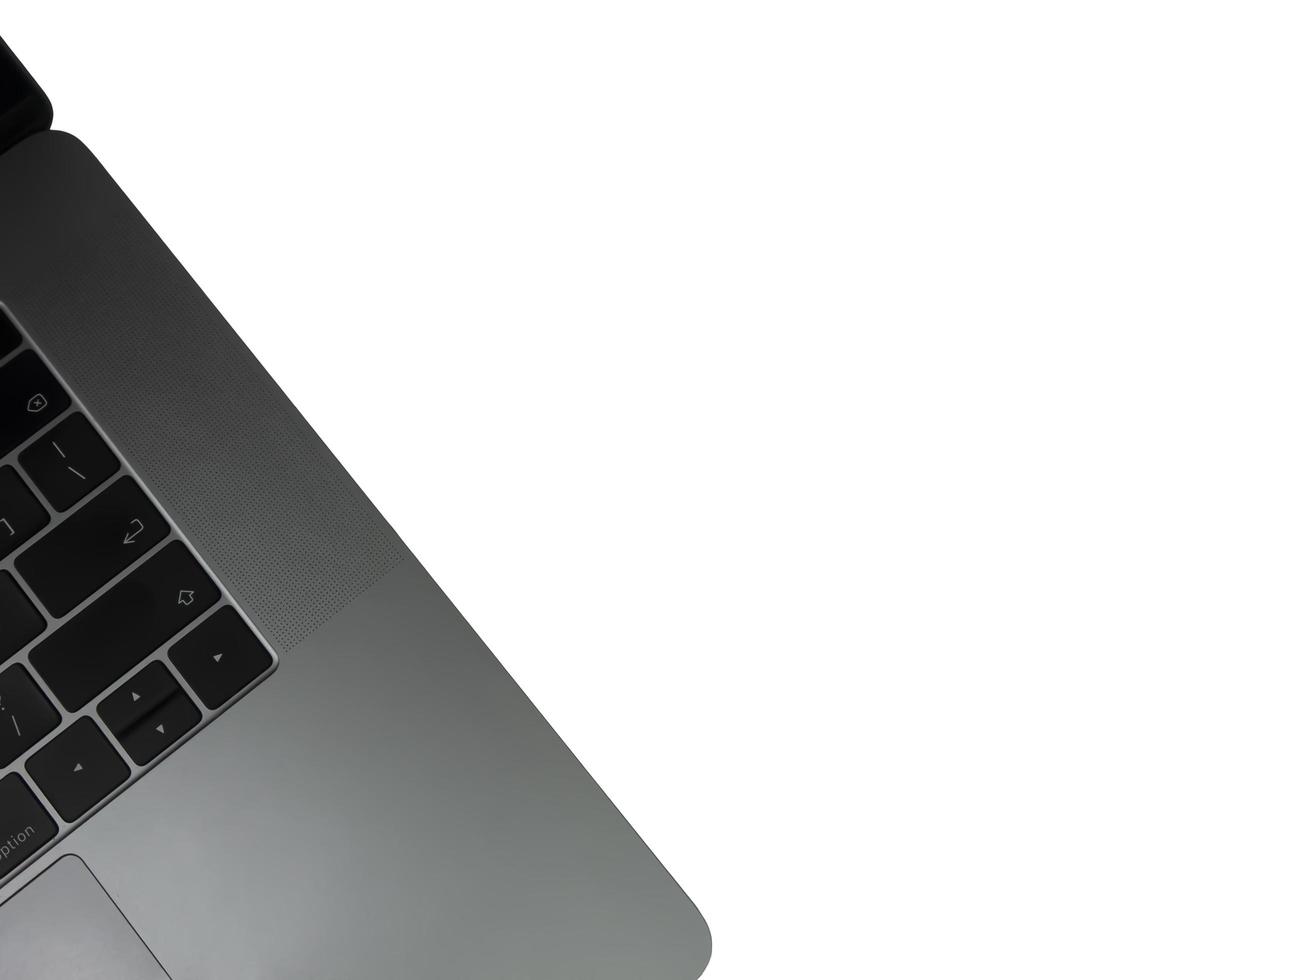 Laptop isolated on the white background with copy space photo